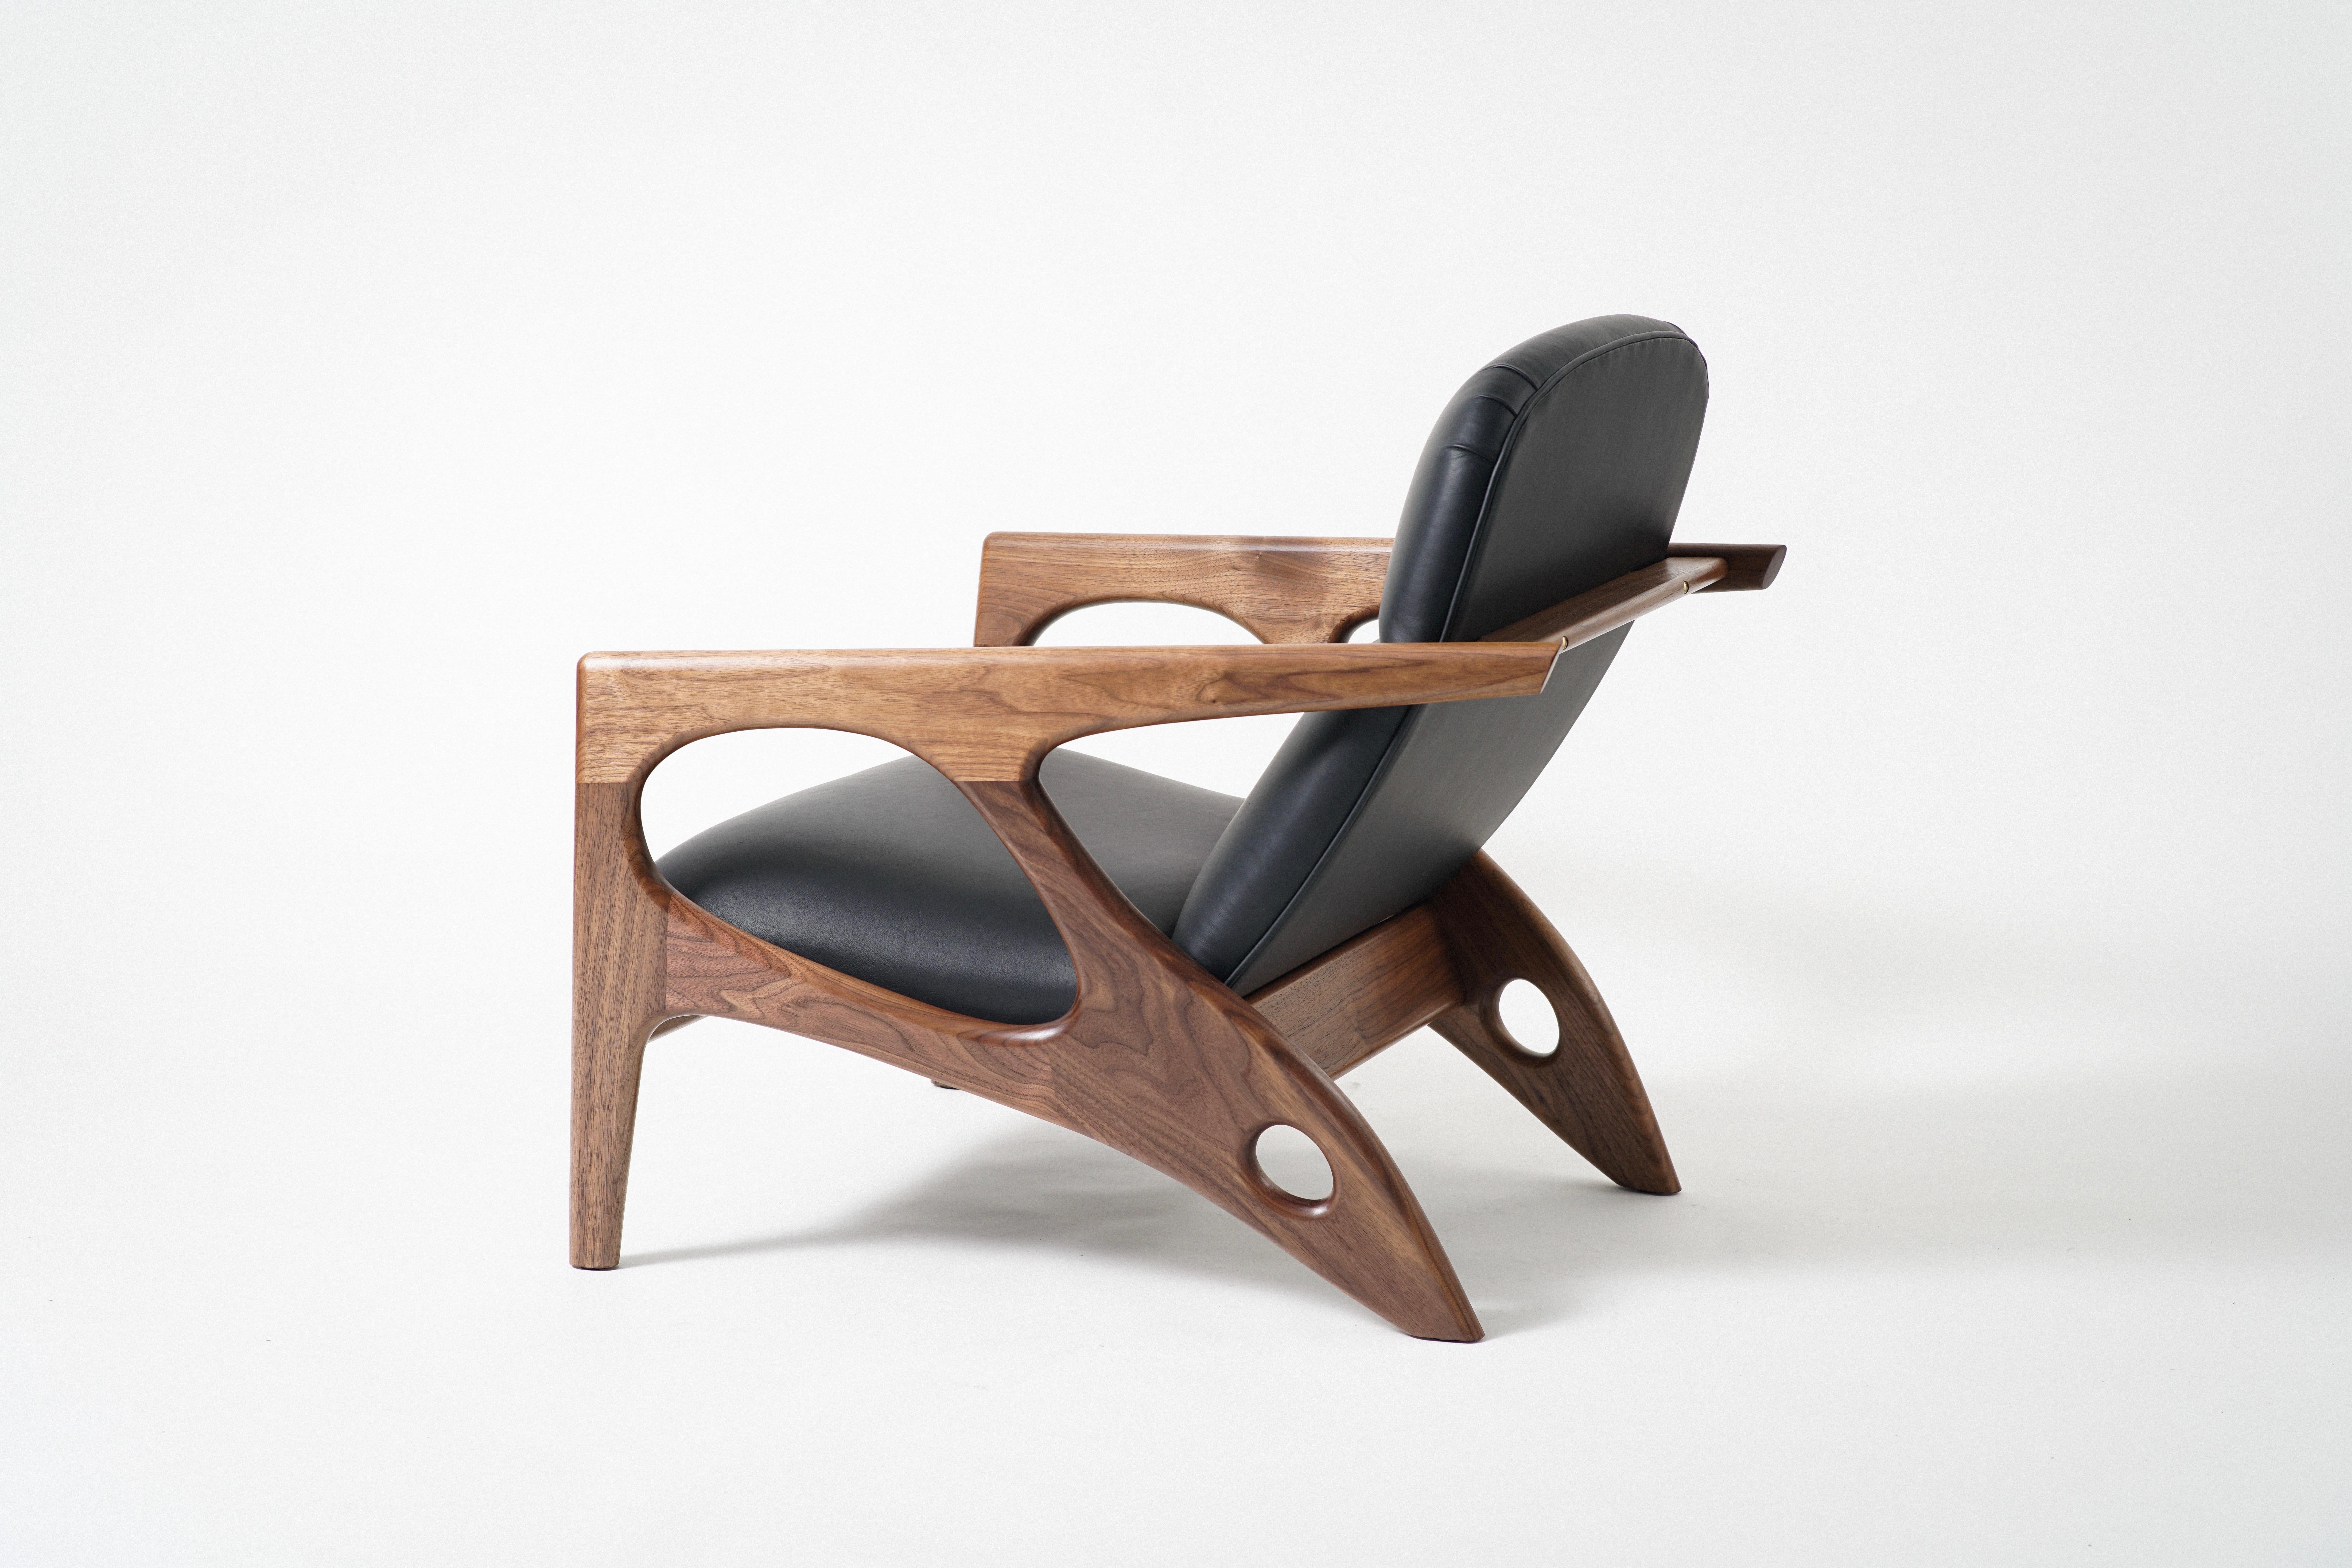 The Osprey Lounge Chair has an exposed hardwood frame that cradles an upholstered shell, with leather upholstery. The unique frame takes inspiration from both nautical design and the natural world. The generous frame opens up and tapers back, like a